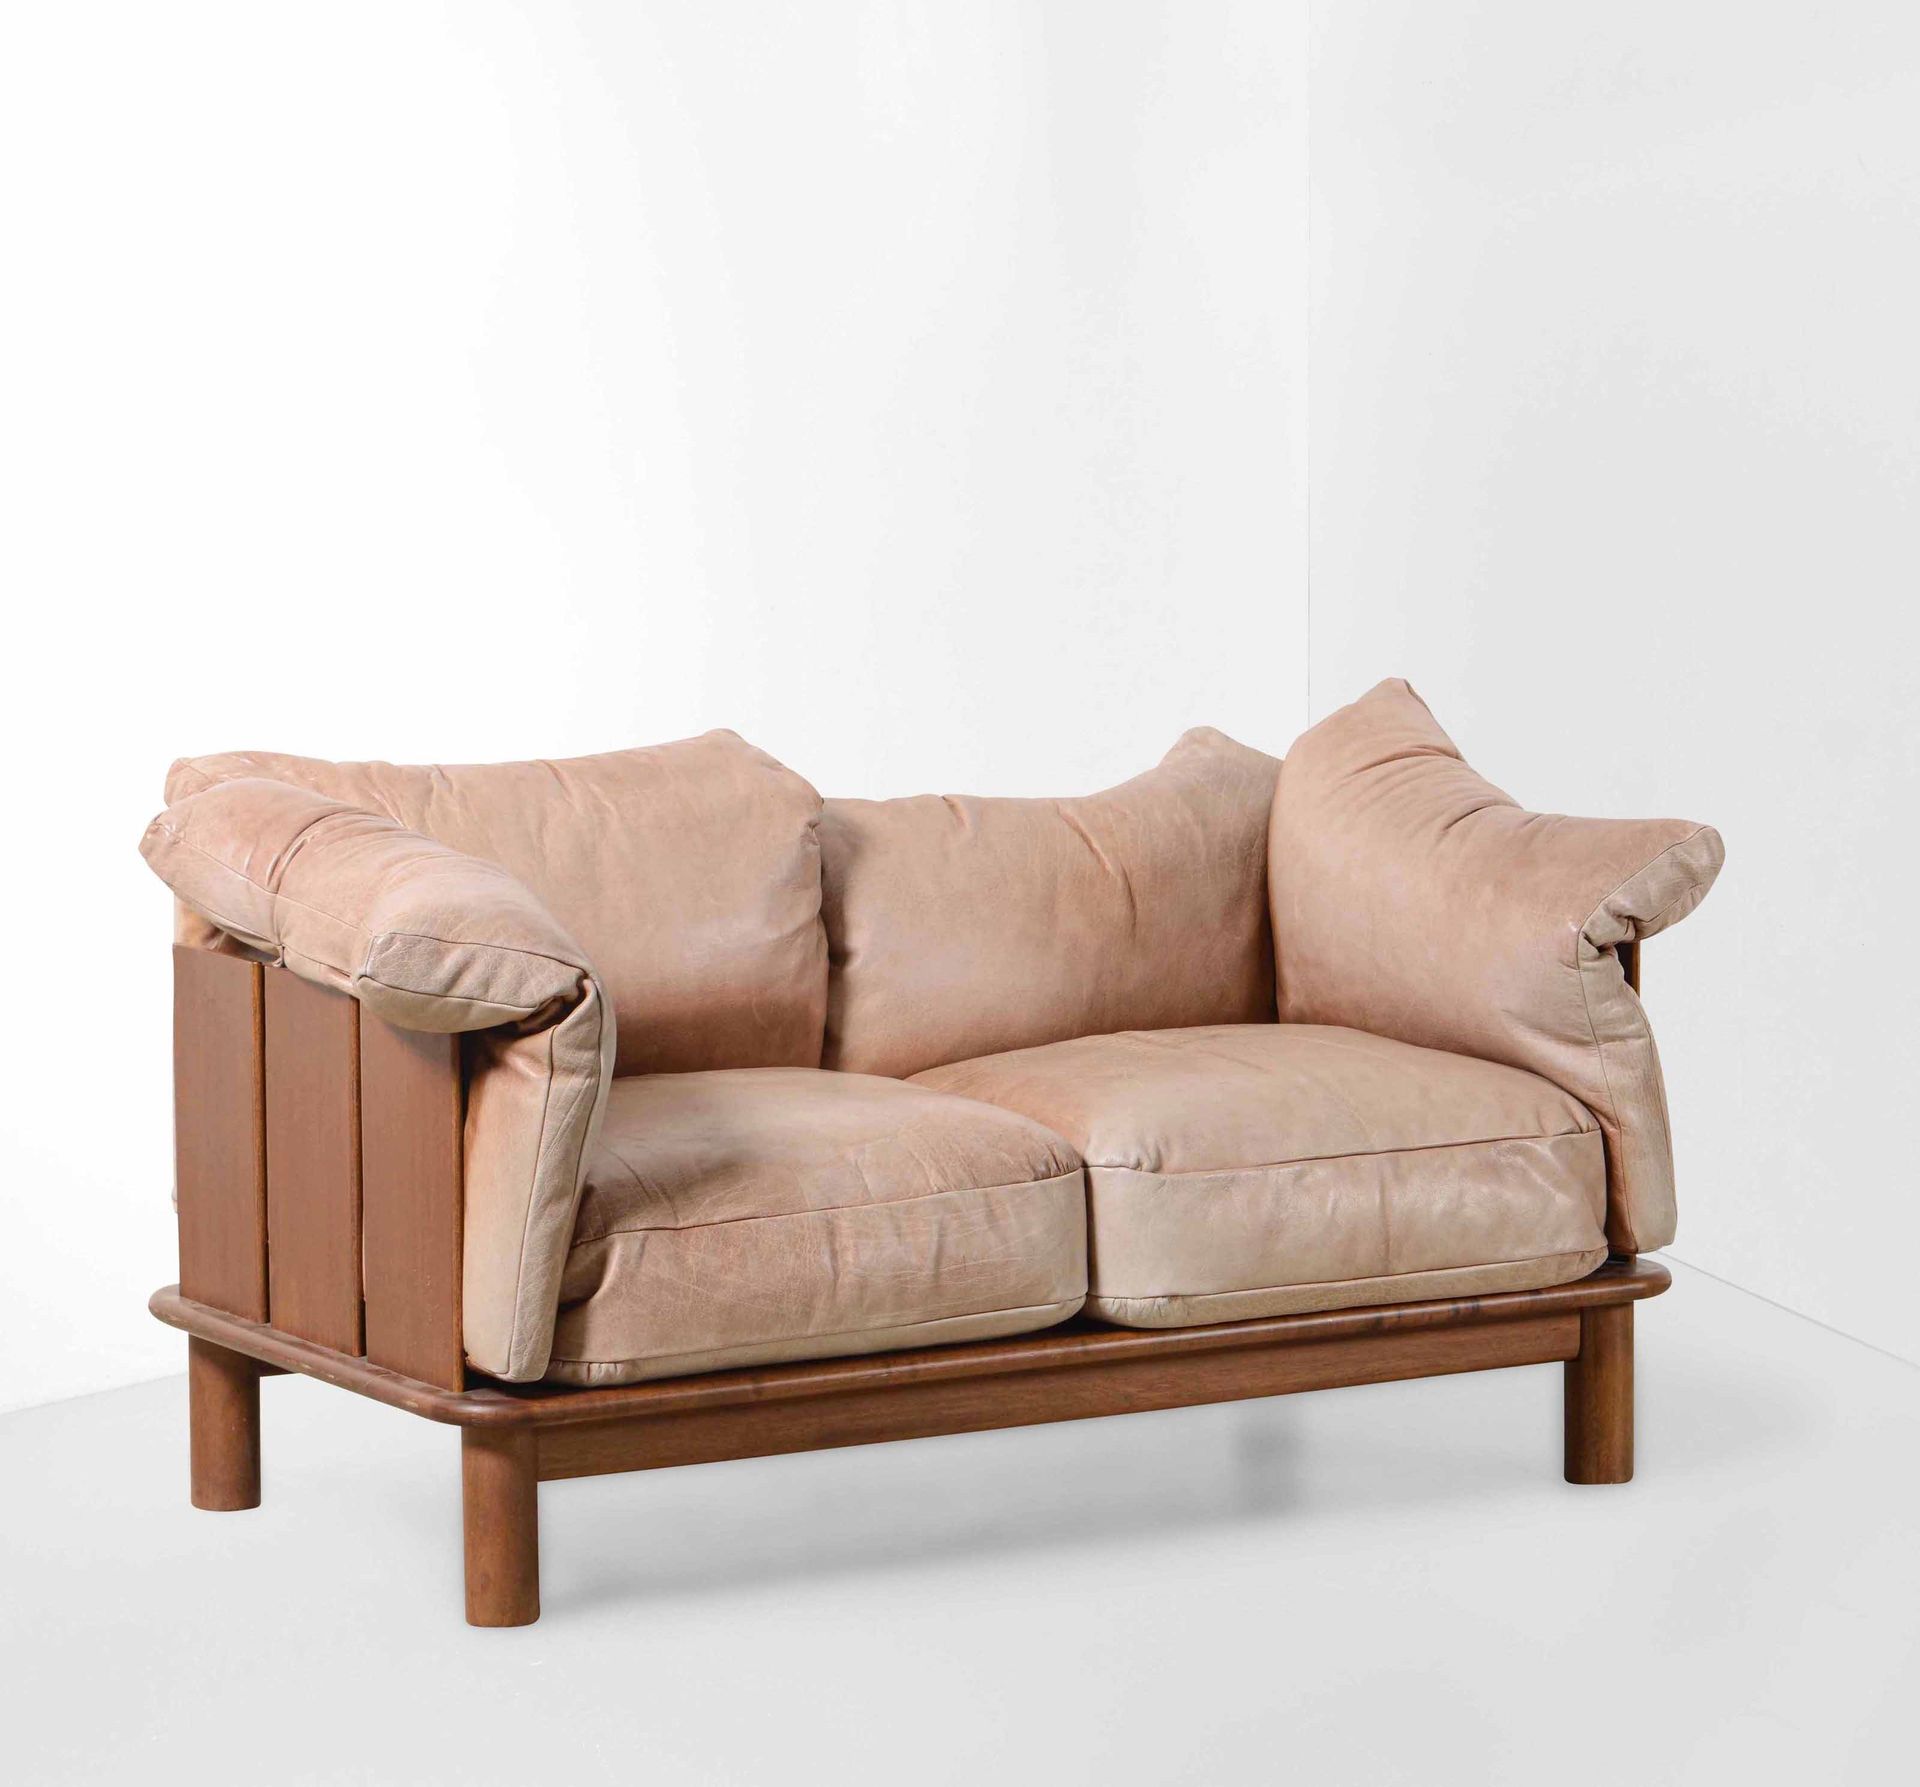 De Pas d'Urbino Lomazzi Pitti mod. Sofa with wooden frame and supports and leath&hellip;